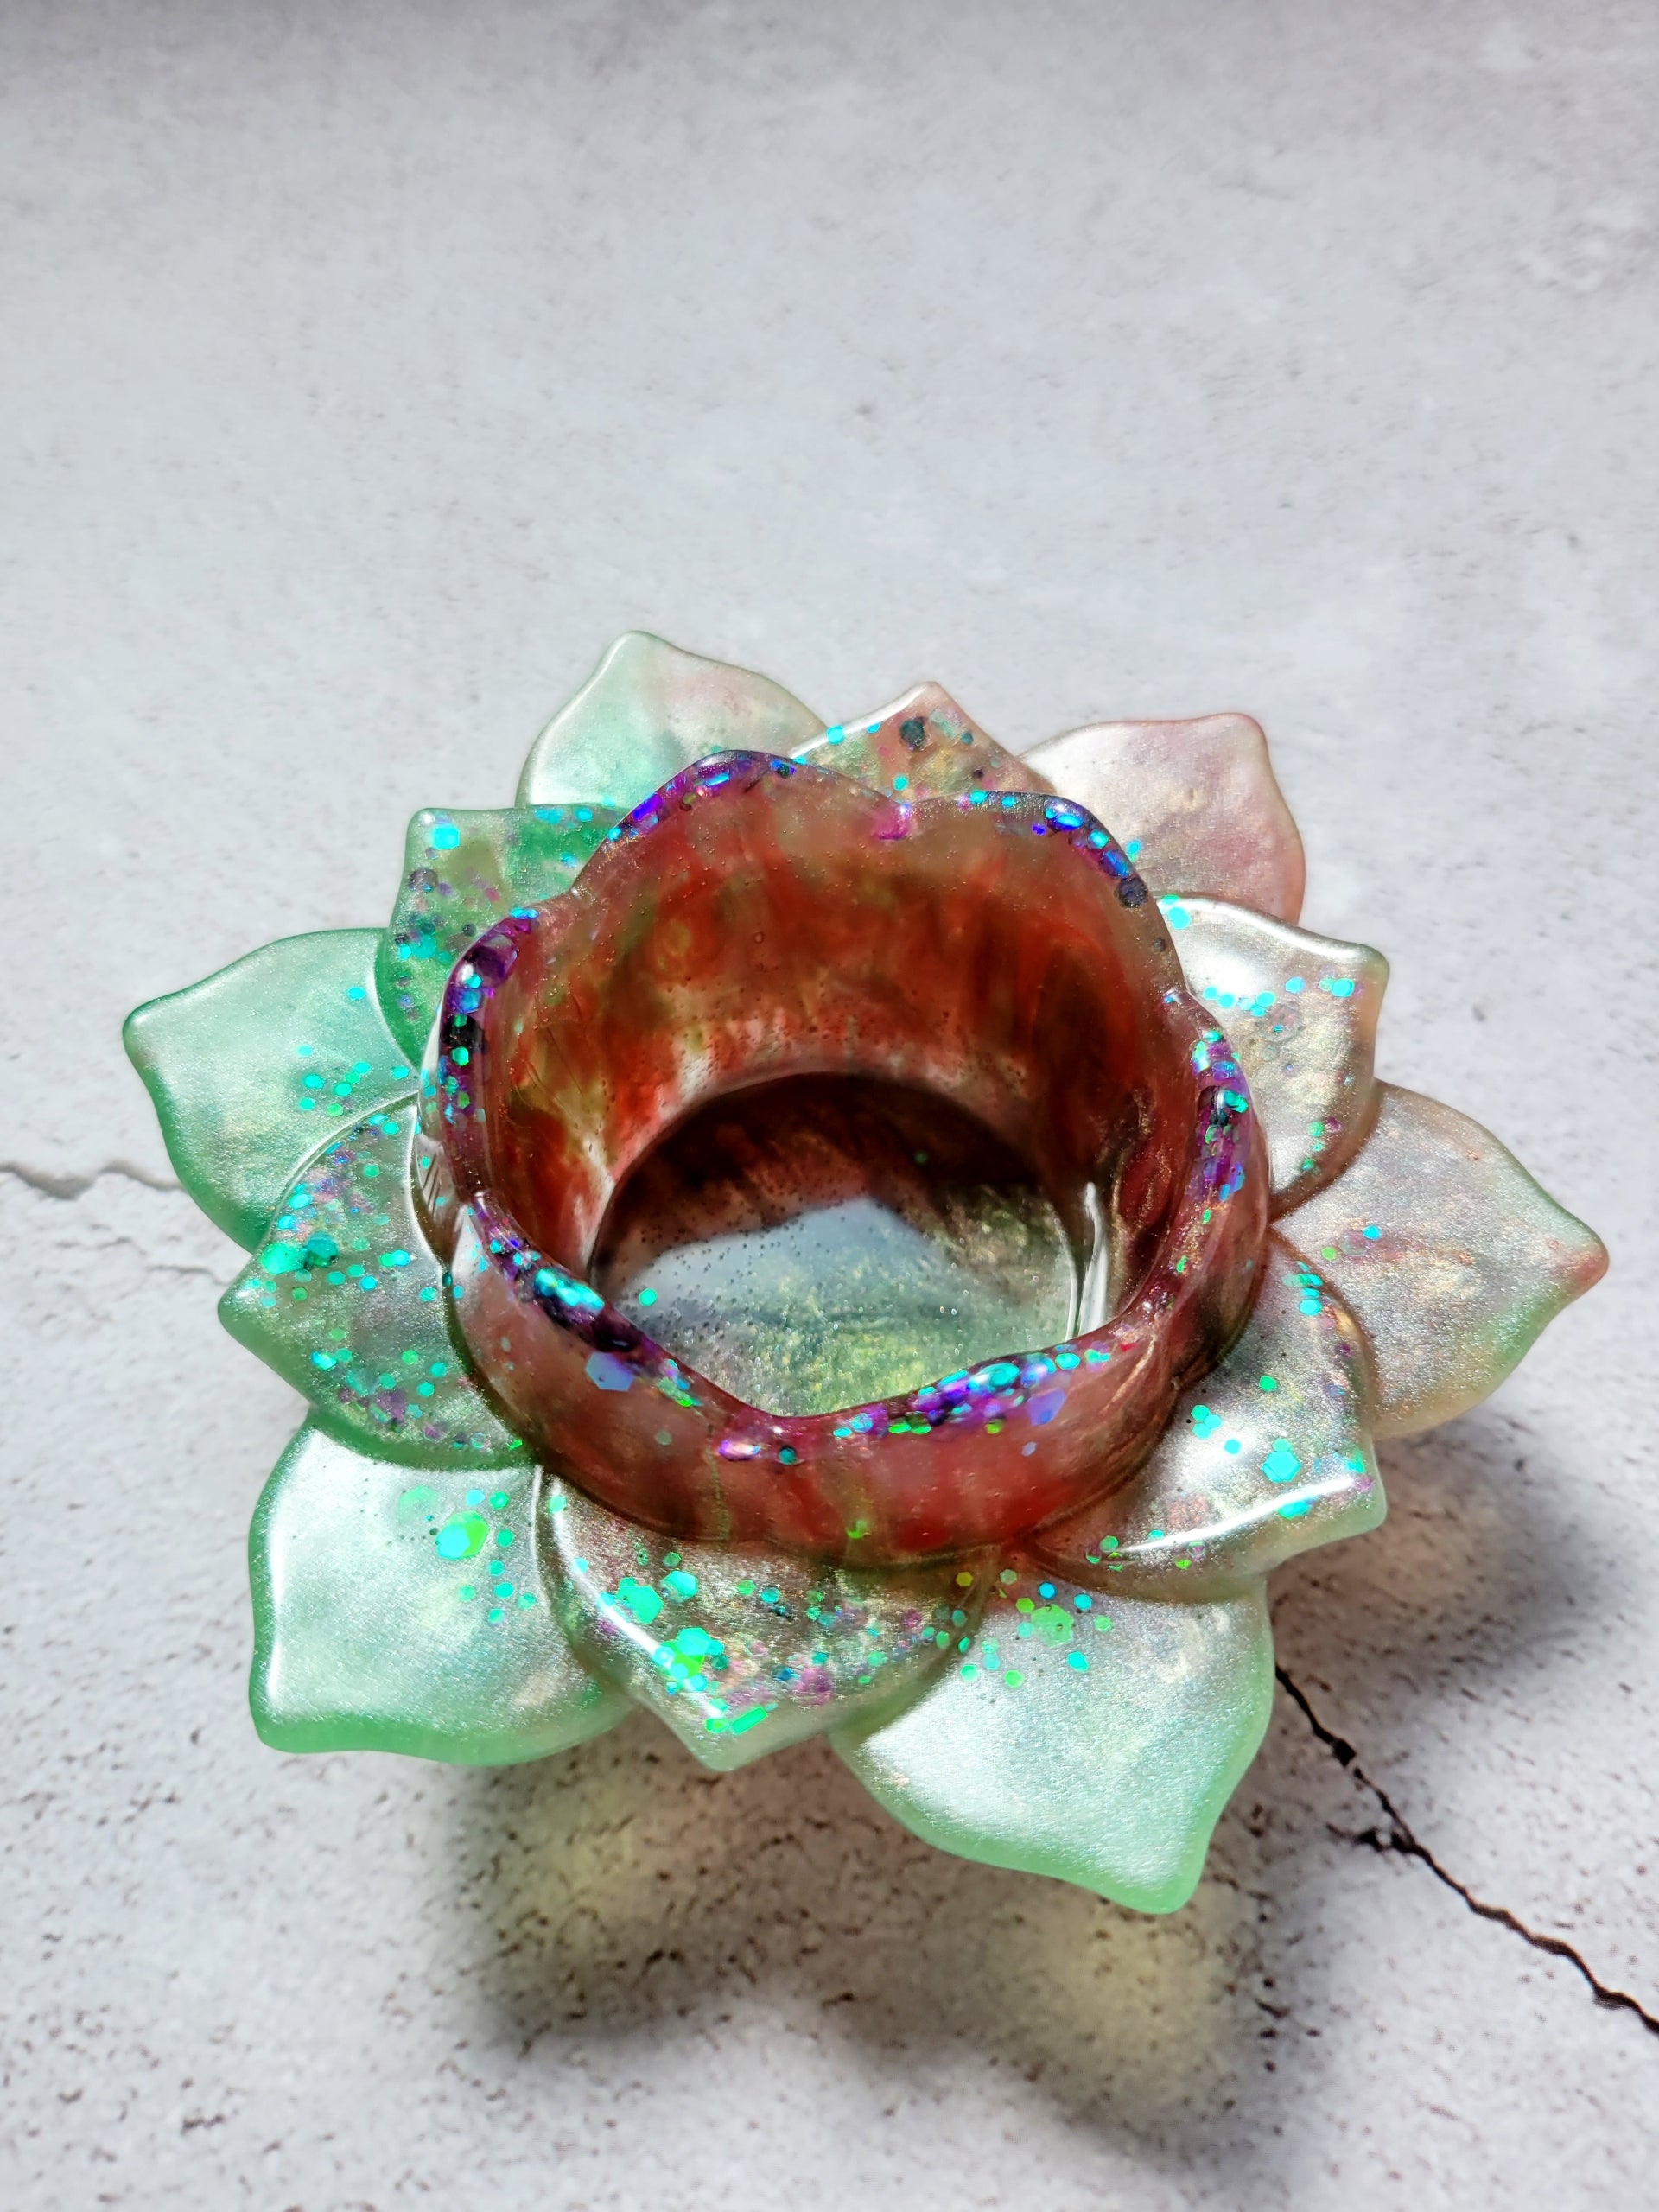 A side birds eye view of a tealight candle holder in the style of a lotus flower. It's got green and brown coloring with flecks of colorful glitter along the petals. 